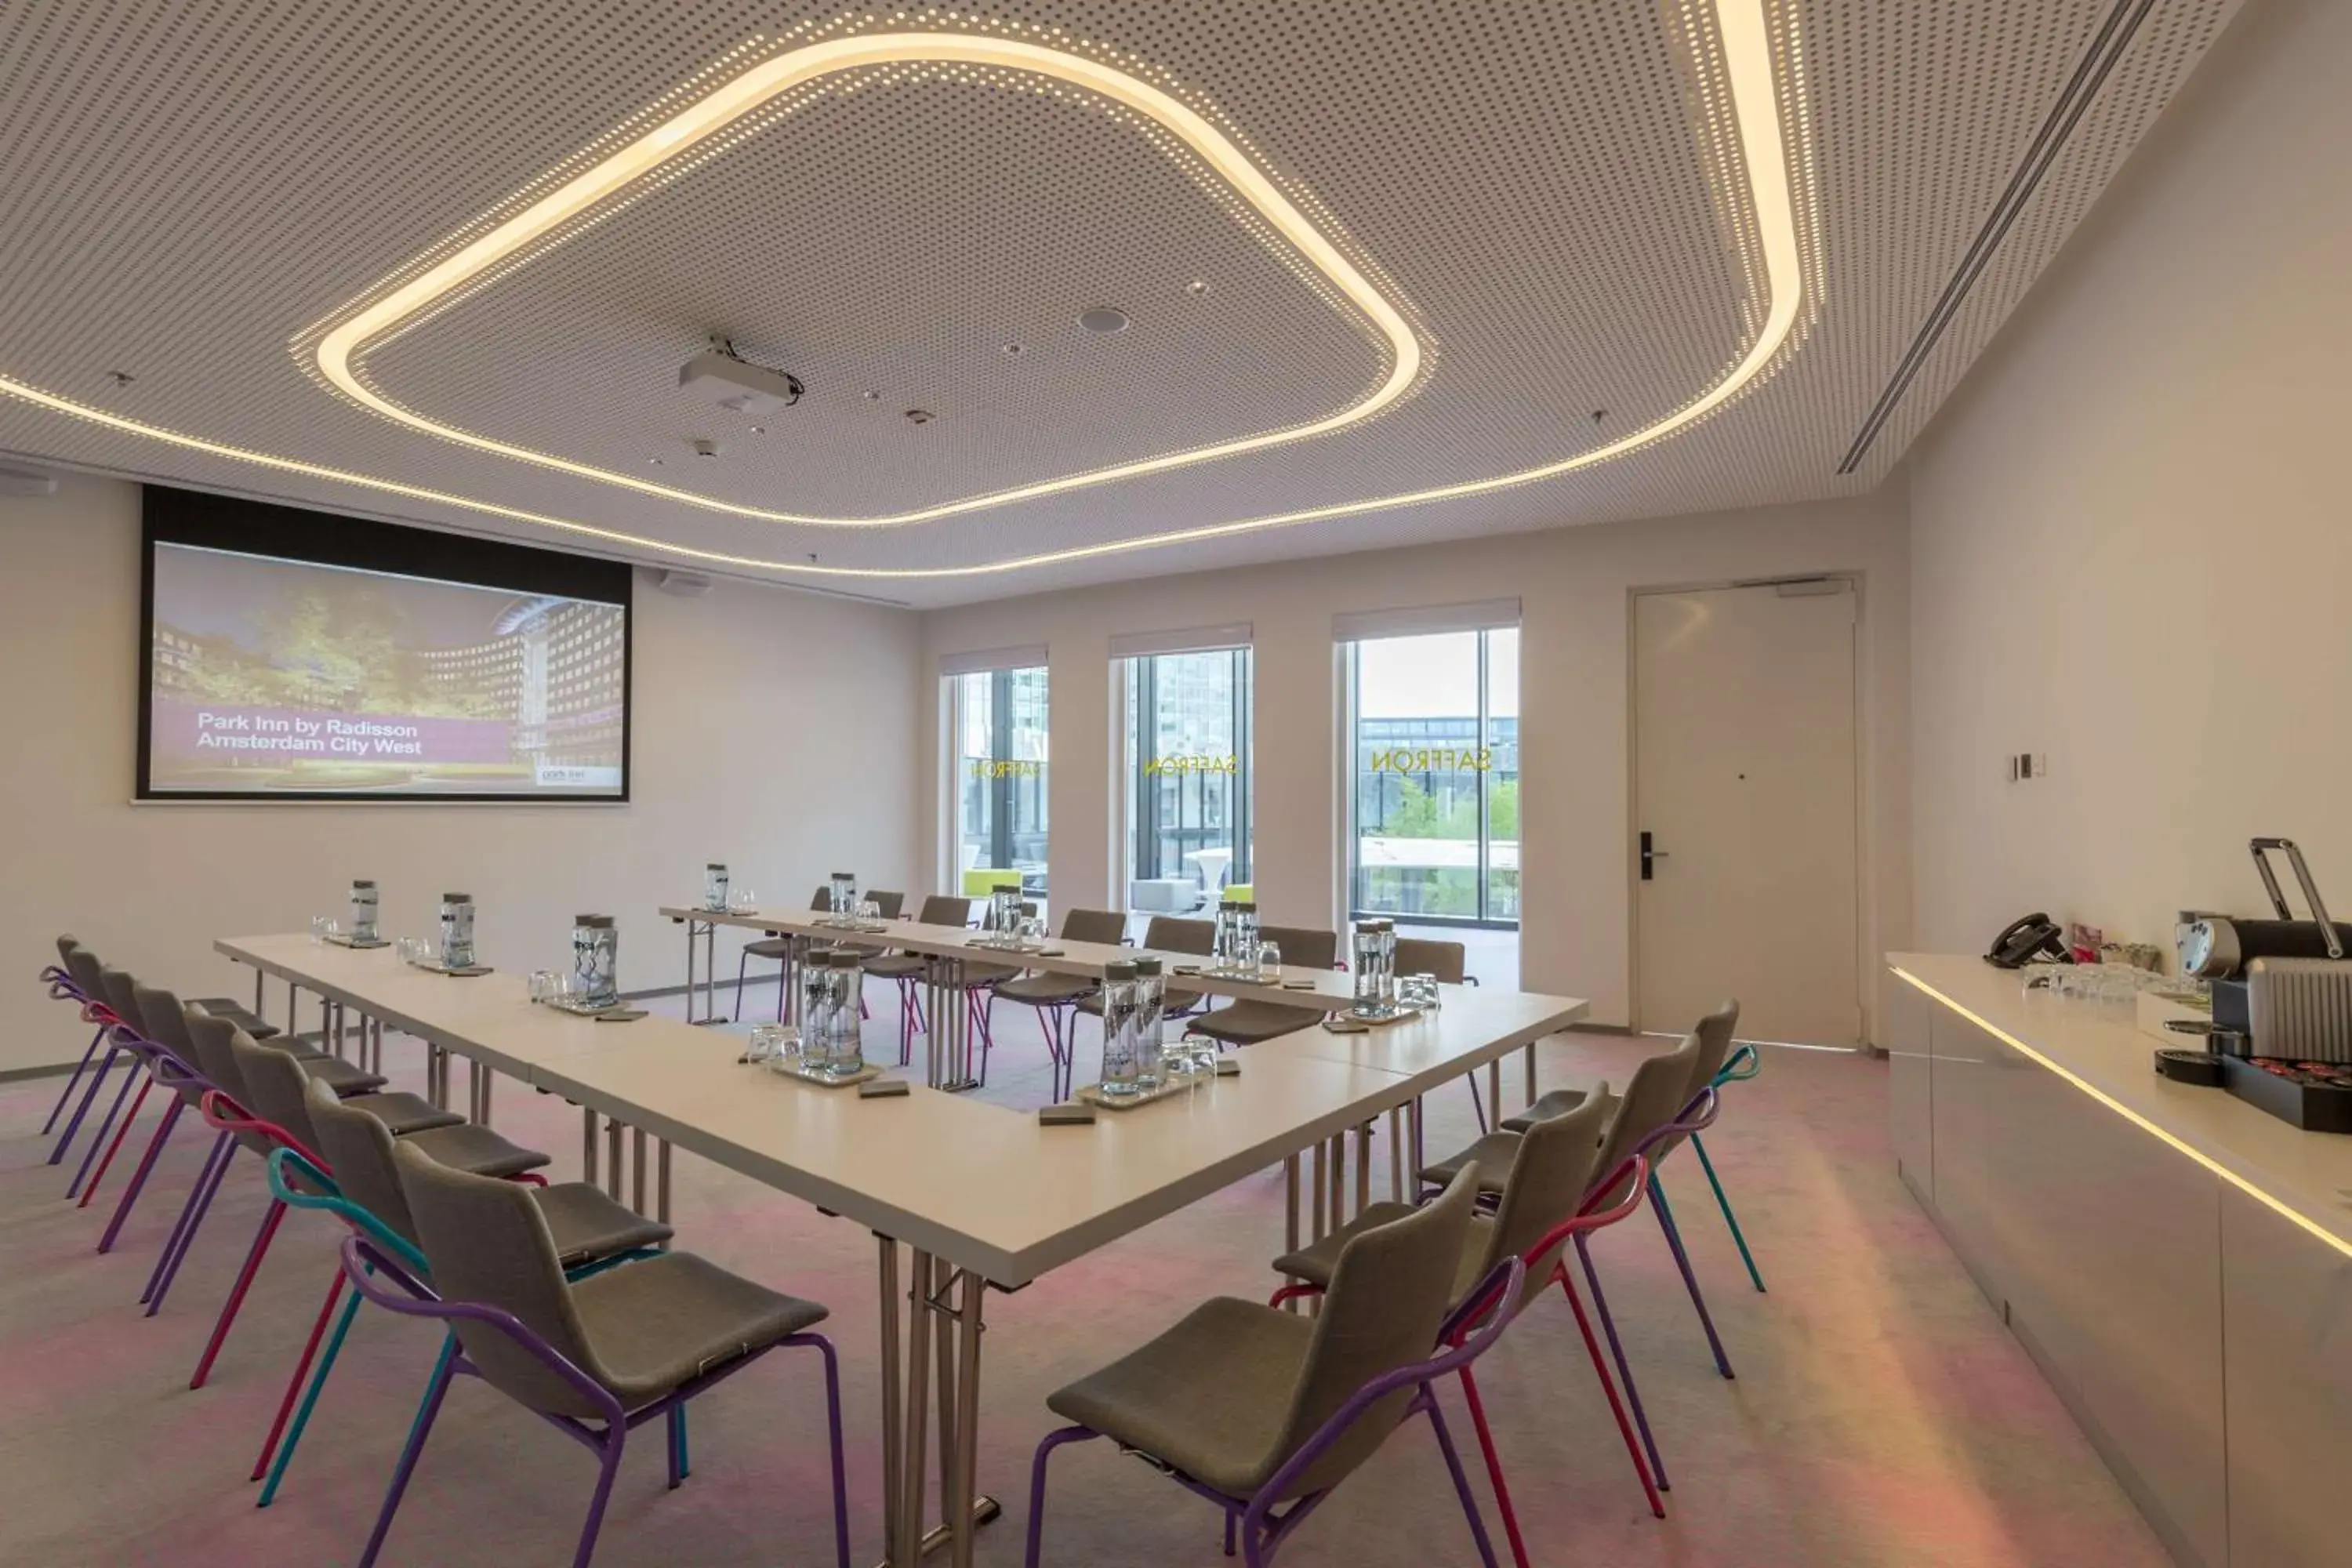 Meeting/conference room in Park Inn by Radisson Amsterdam City West